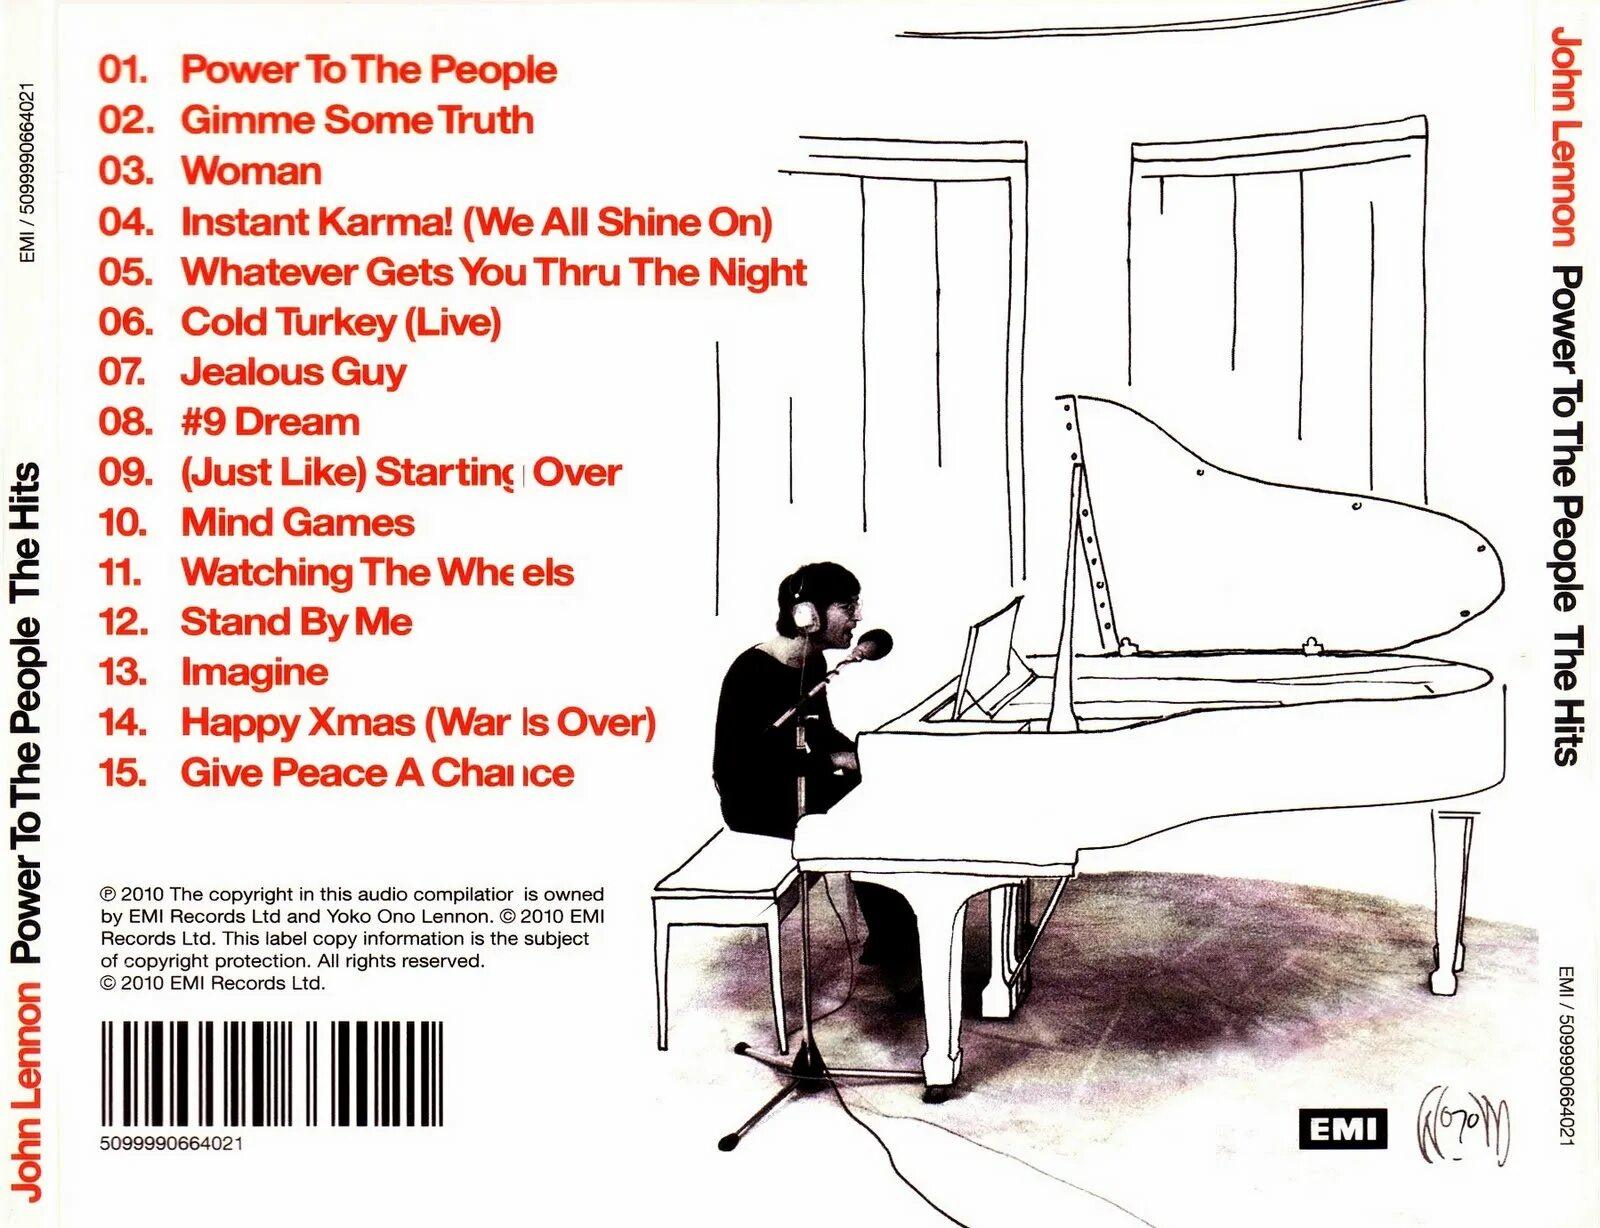 Power to the people John Lennon. Power to the people Джон Леннон. Джон Леннон (2010). Lennon John "Gimme some Truth".